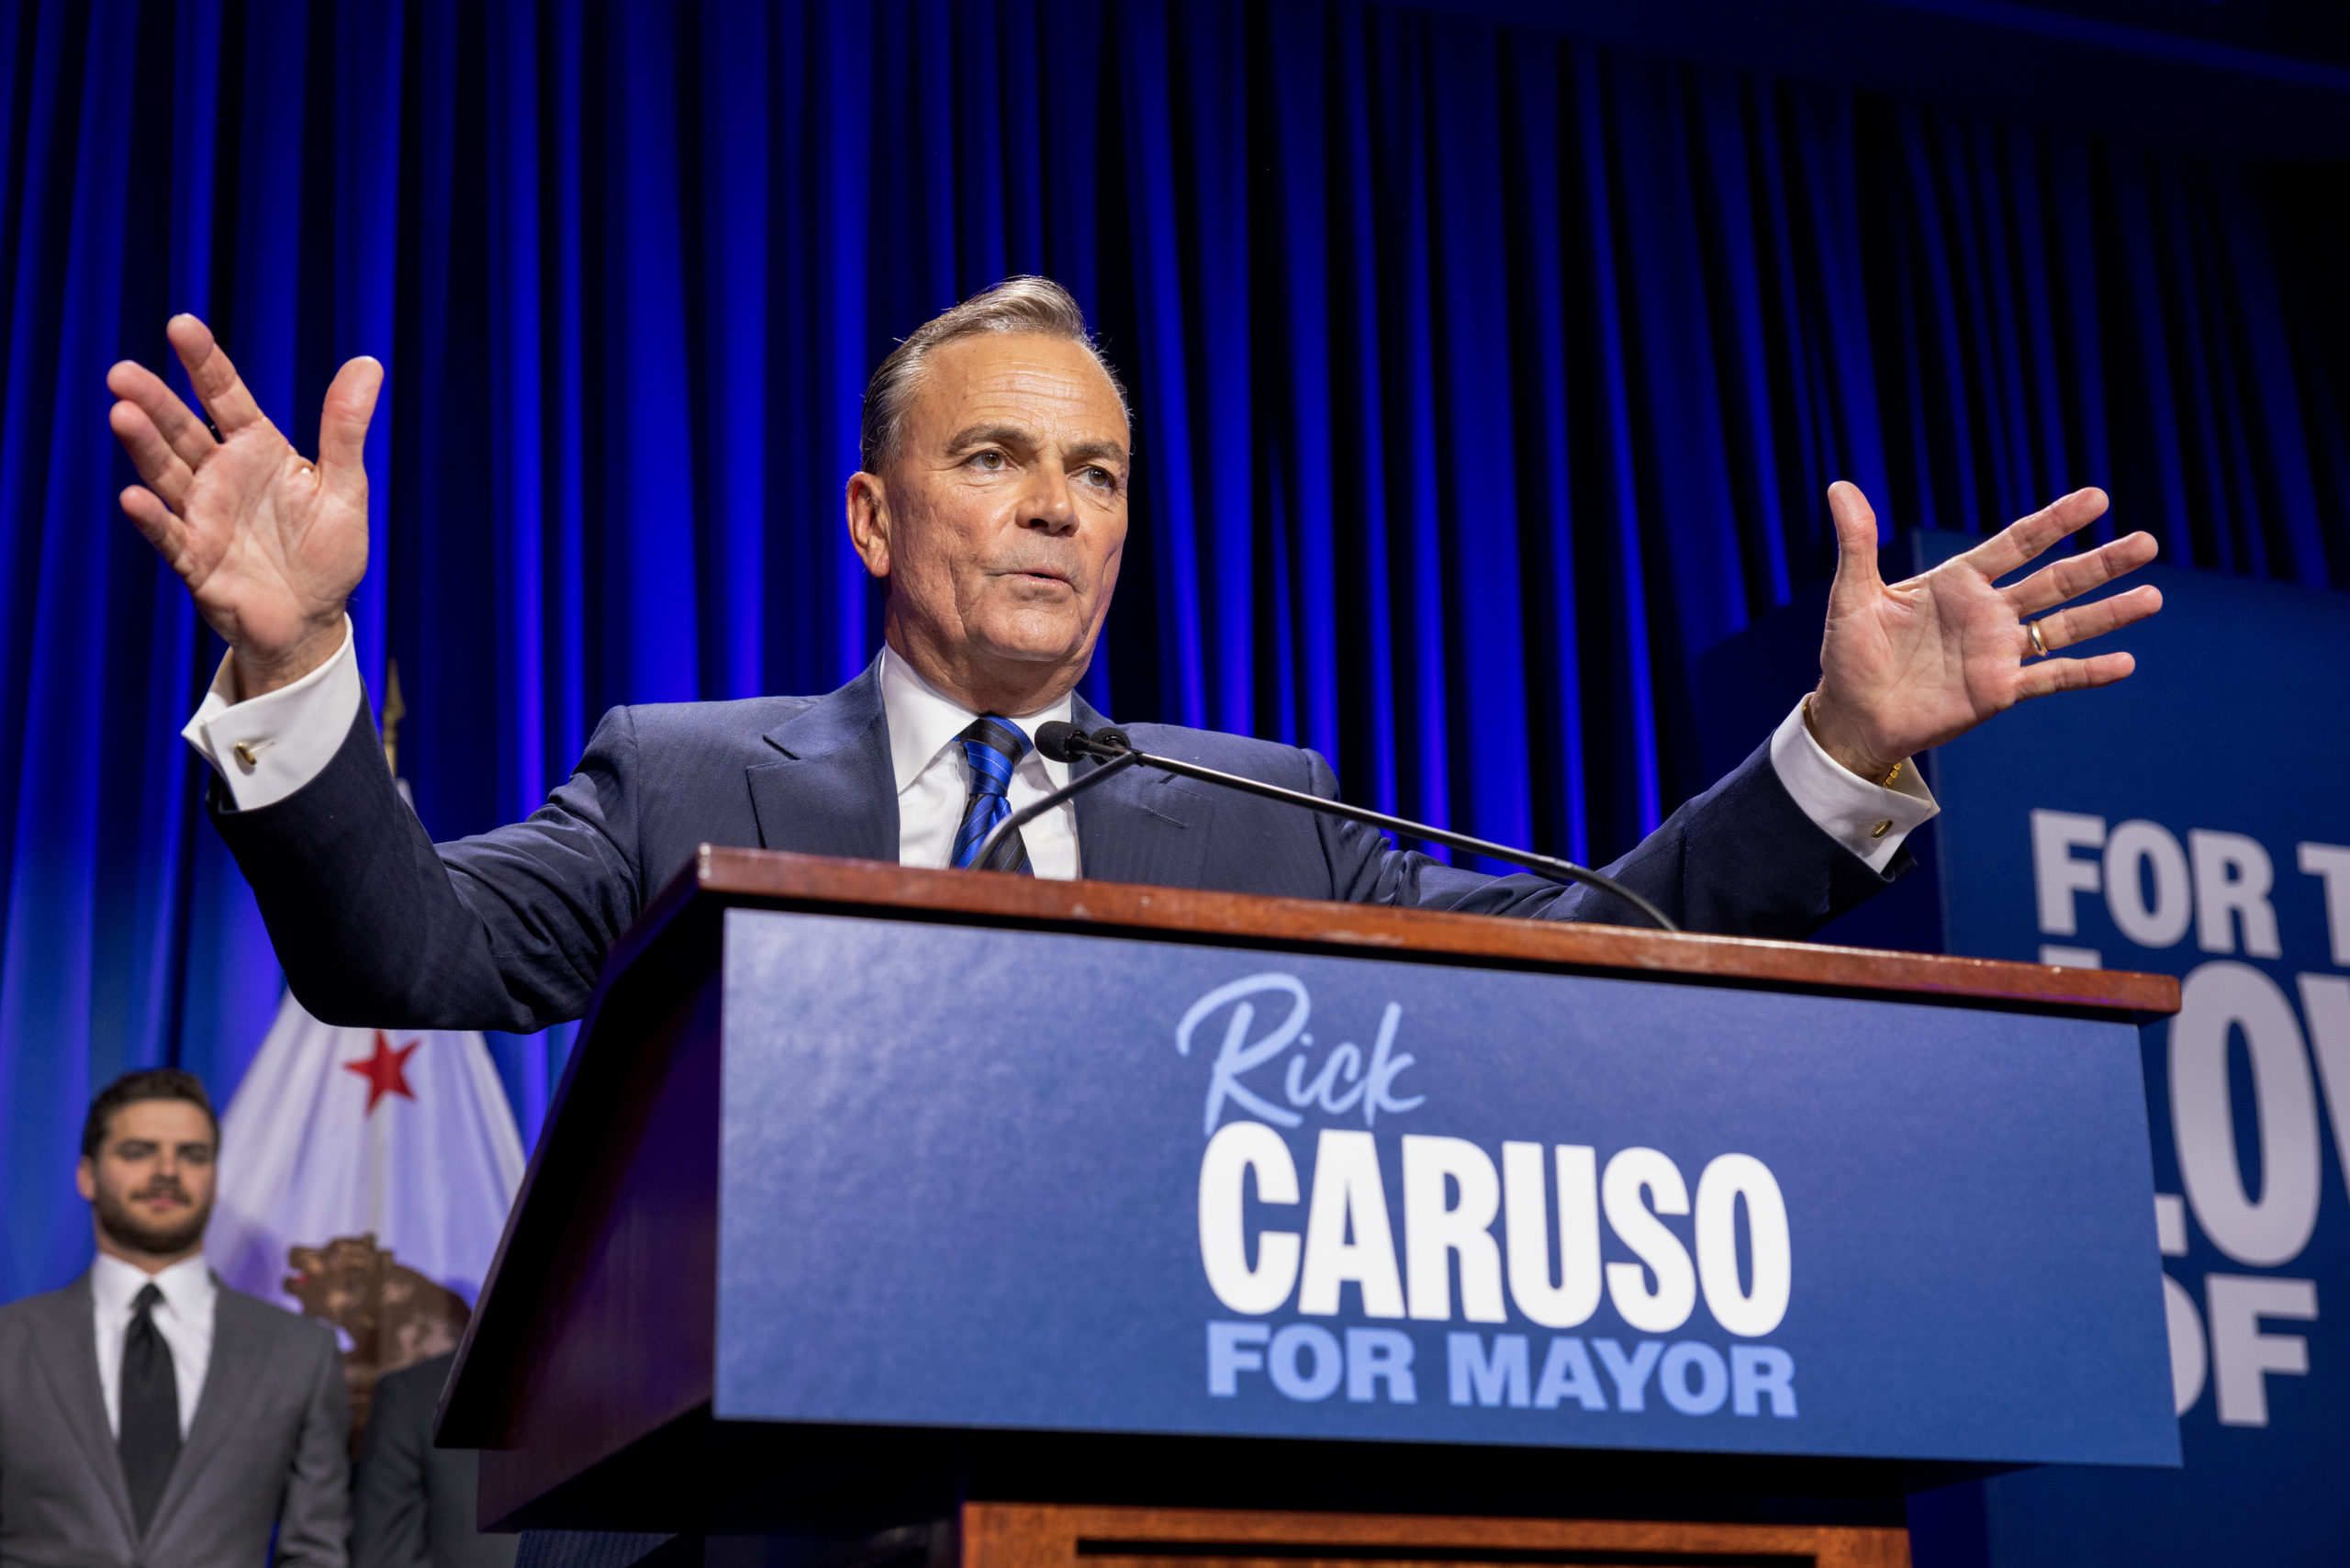 LOS ANGELES, CA - NOVEMBER 08: Los Angeles mayoral candidate Rick Caruso speaks to supporters during an election night party on November 8, 2022 in Los Angeles, California. Caruso is in a tight race against U.S. Rep. Karen Bass (D-CA). (Photo by David McNew/Getty Images)